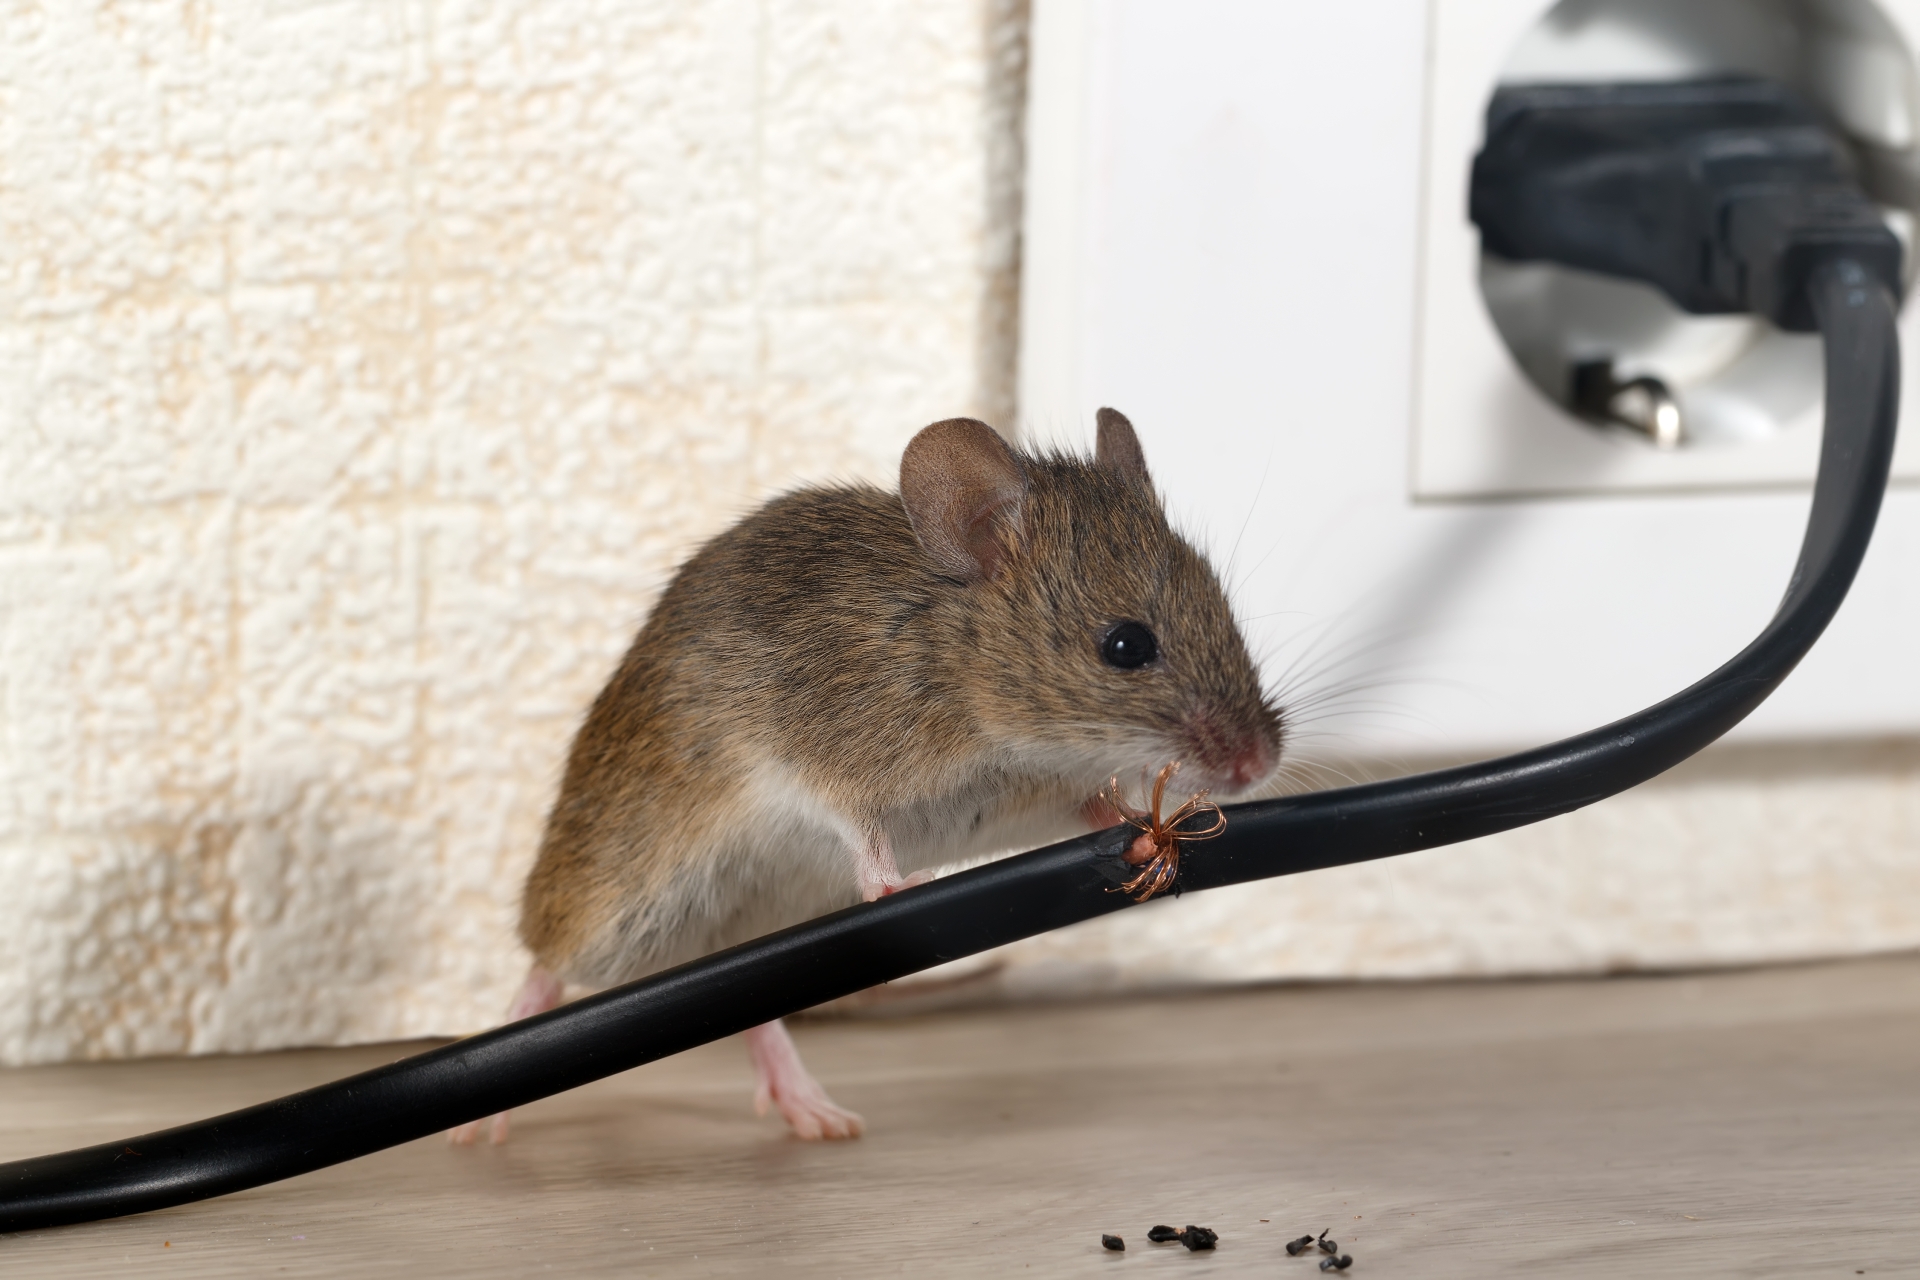 Mice Infestation, Pest Control in Foots Cray, DA14. Call Now 020 8166 9746